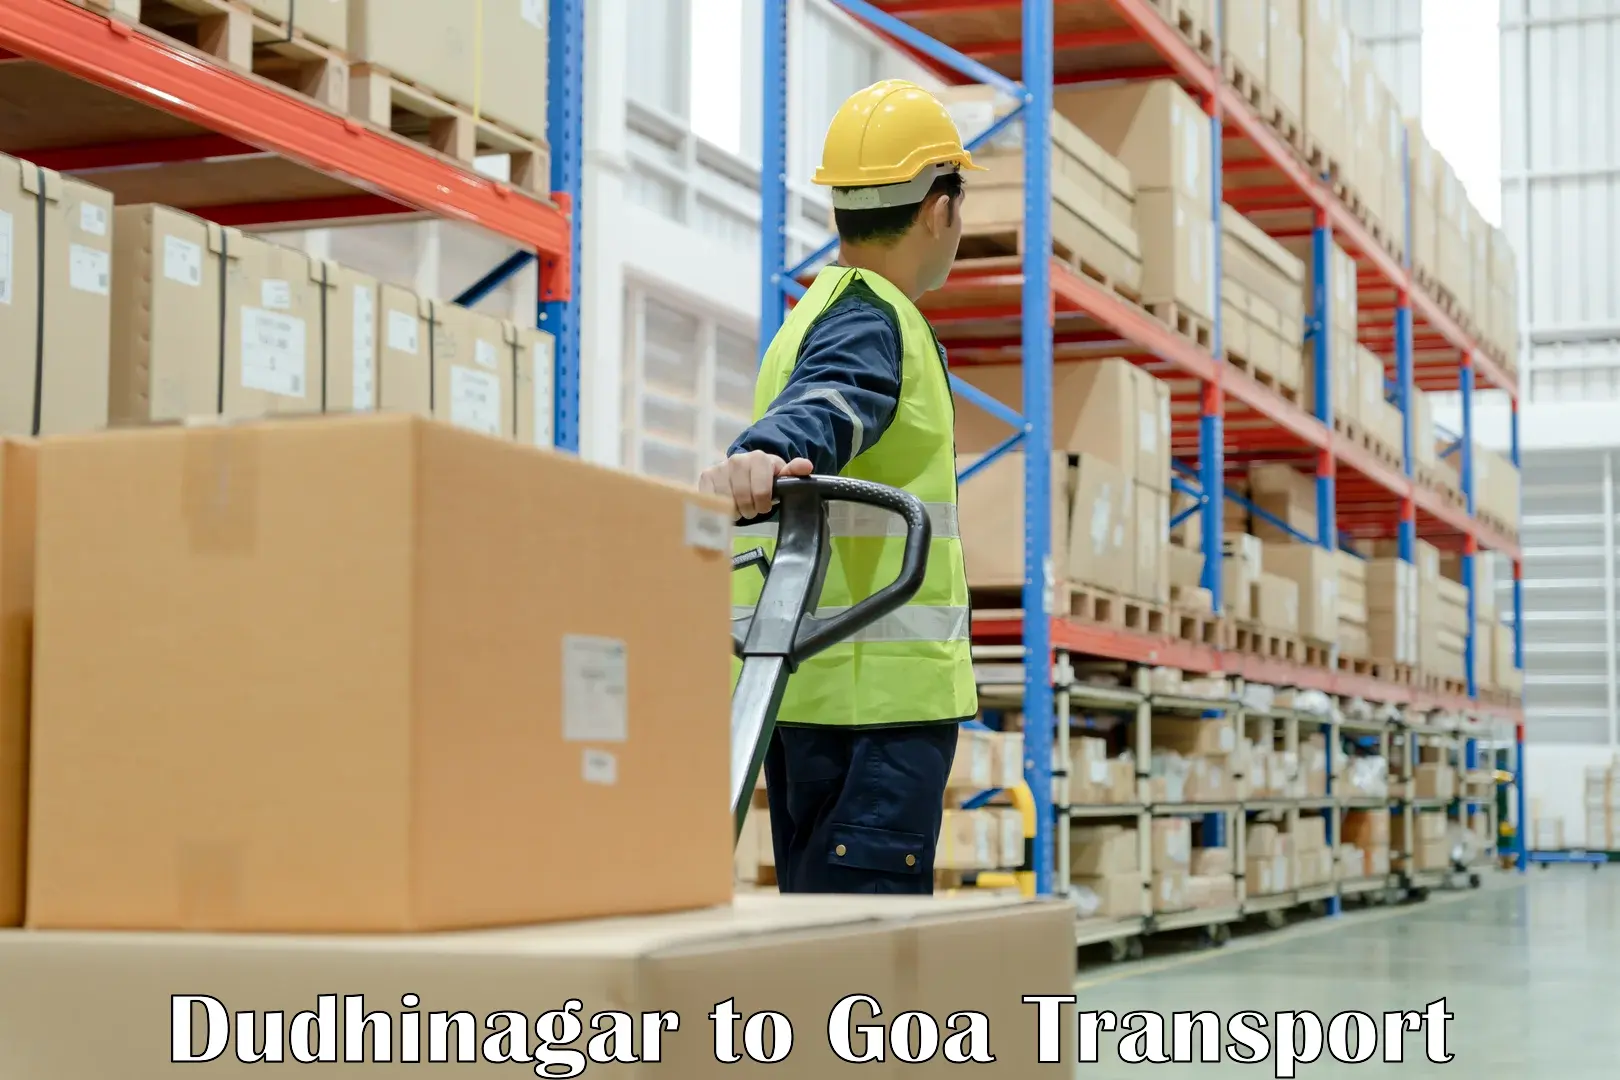 Commercial transport service Dudhinagar to IIT Goa